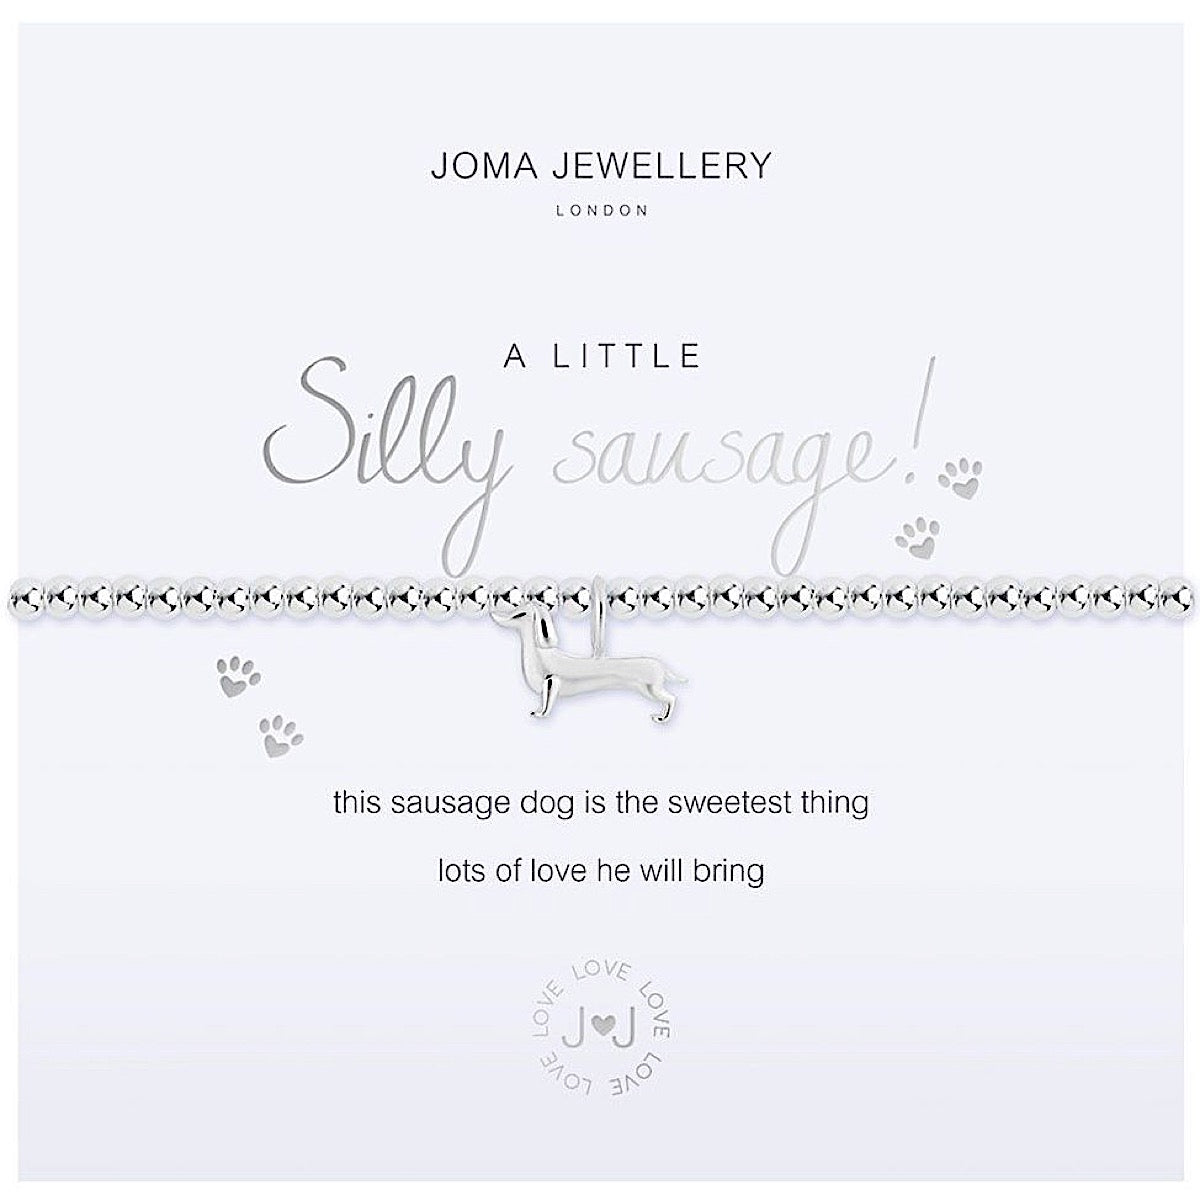 Joma a little Silly Sausage Bracelet - sausage dog | More Than Just A Gift